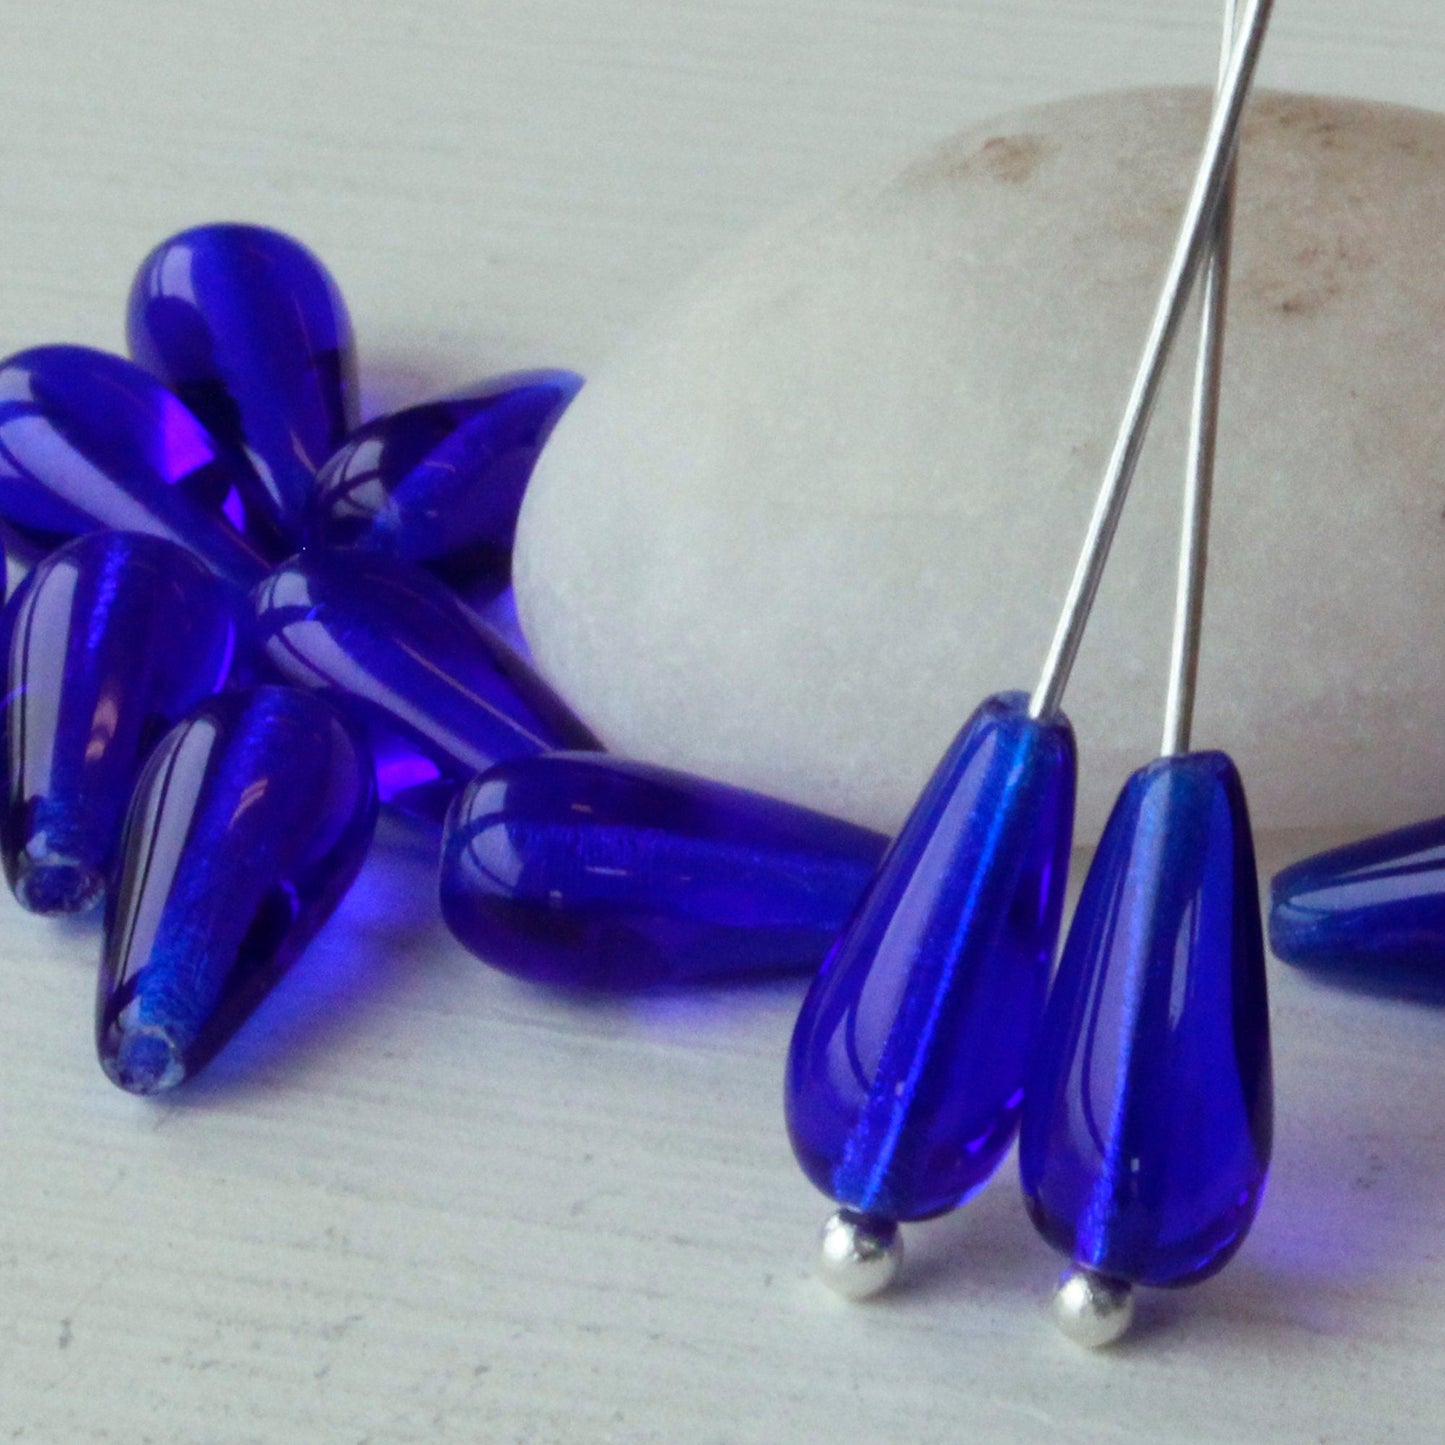 6x12mm Long Drilled Drops - Royal Blue - 20 Beads